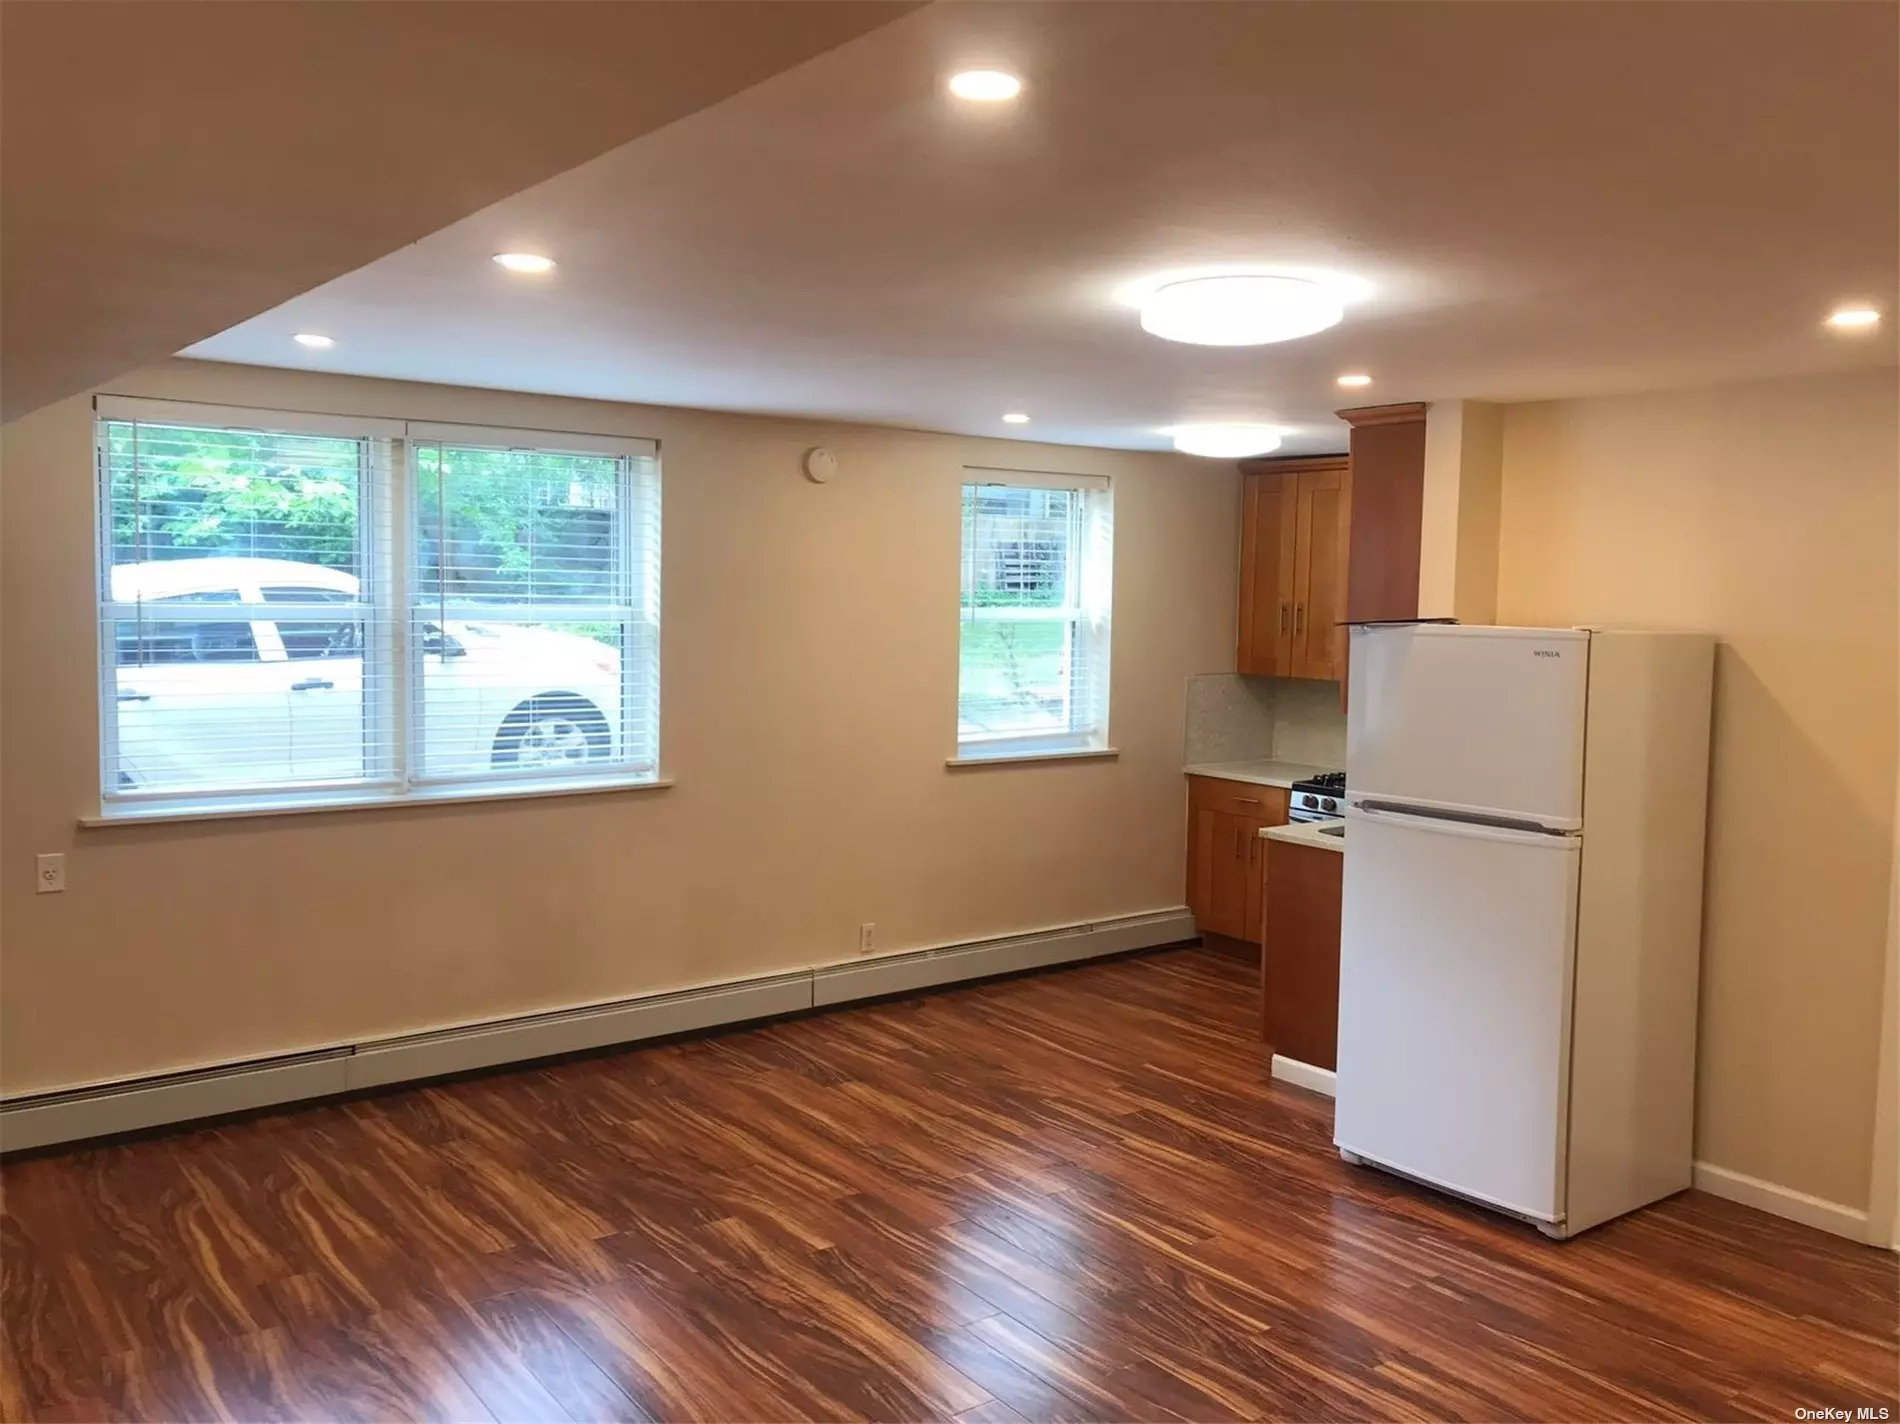 Better Then Rent!! Flushing 435 SF studio condo near Flushing Botanical Garden, walking distance to bus and 7 train Main St. Washer & dryer room is on the same floor.